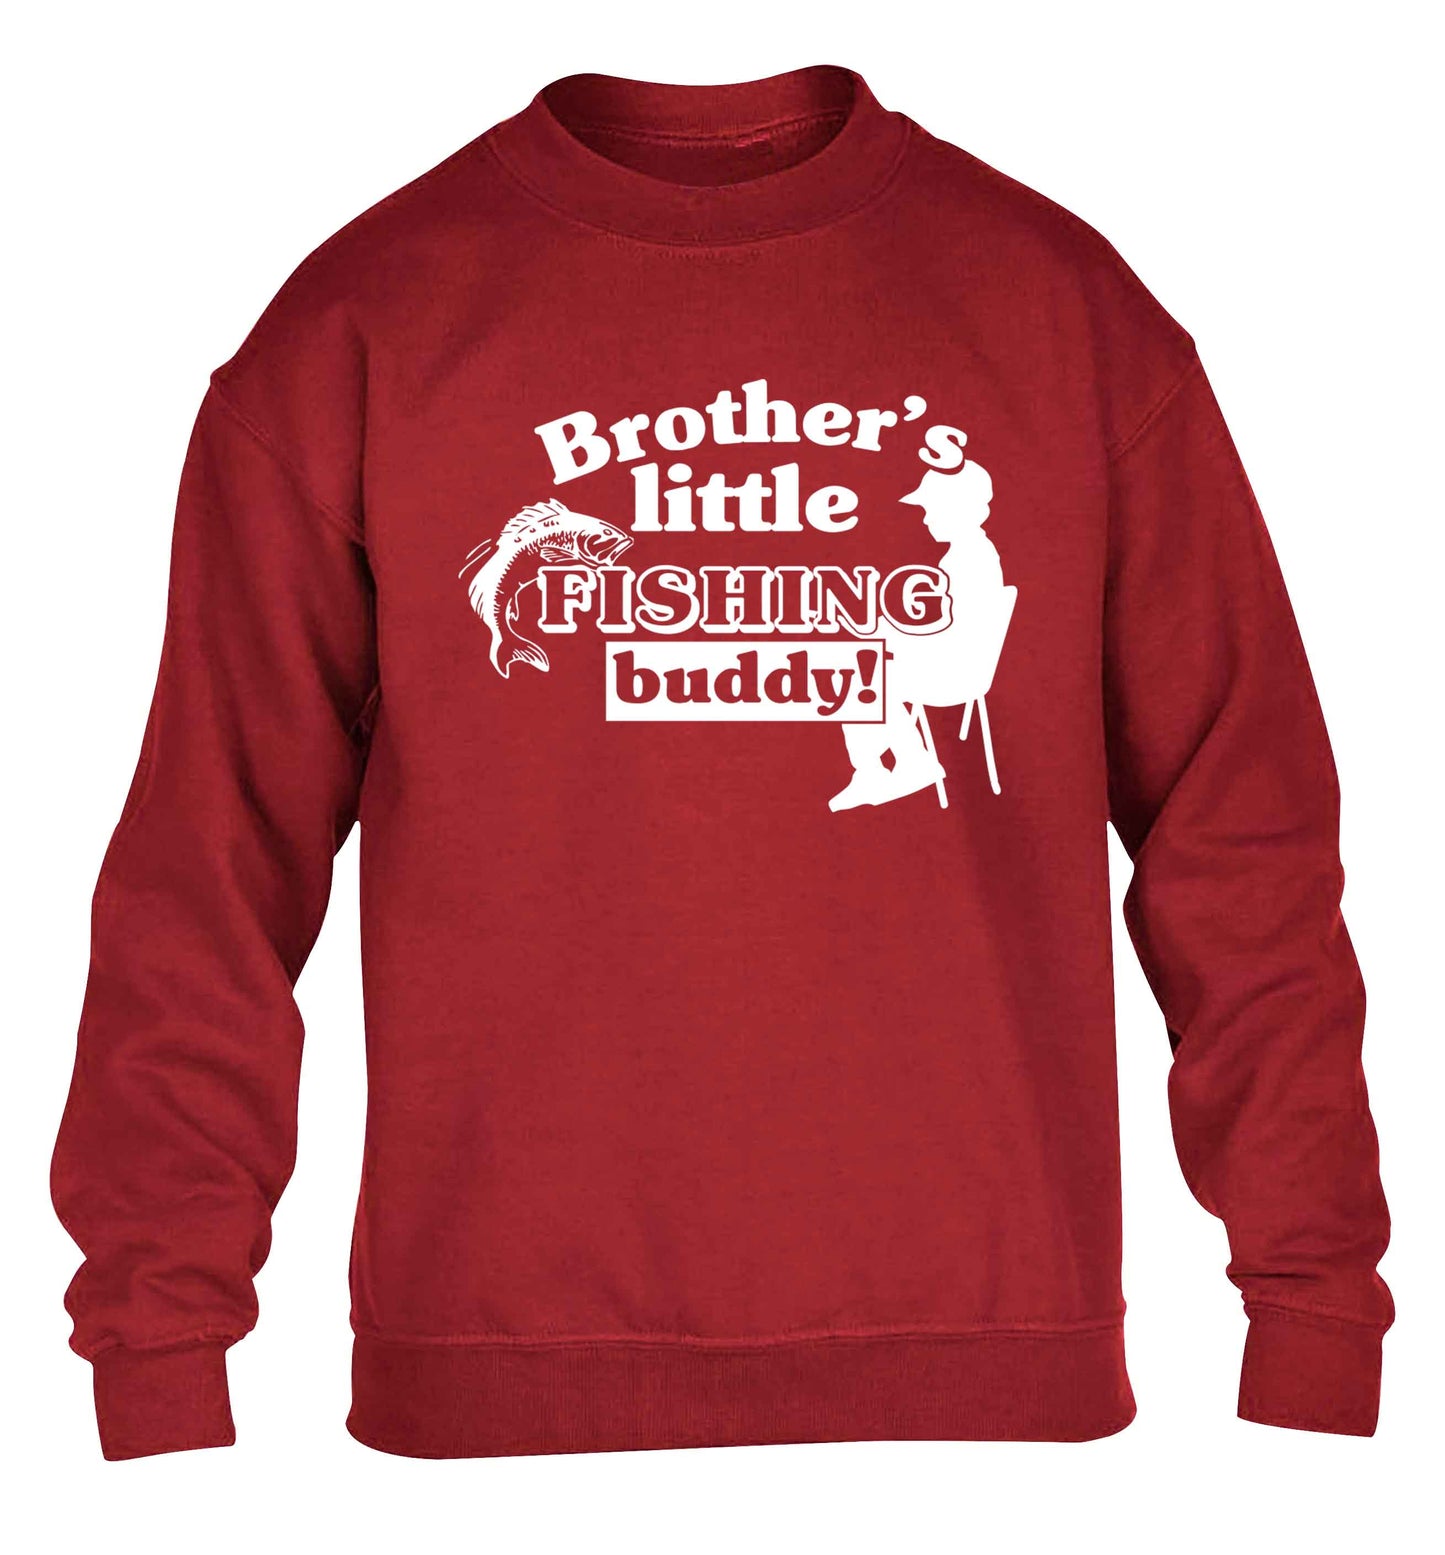 Brother's little fishing buddy children's grey sweater 12-13 Years